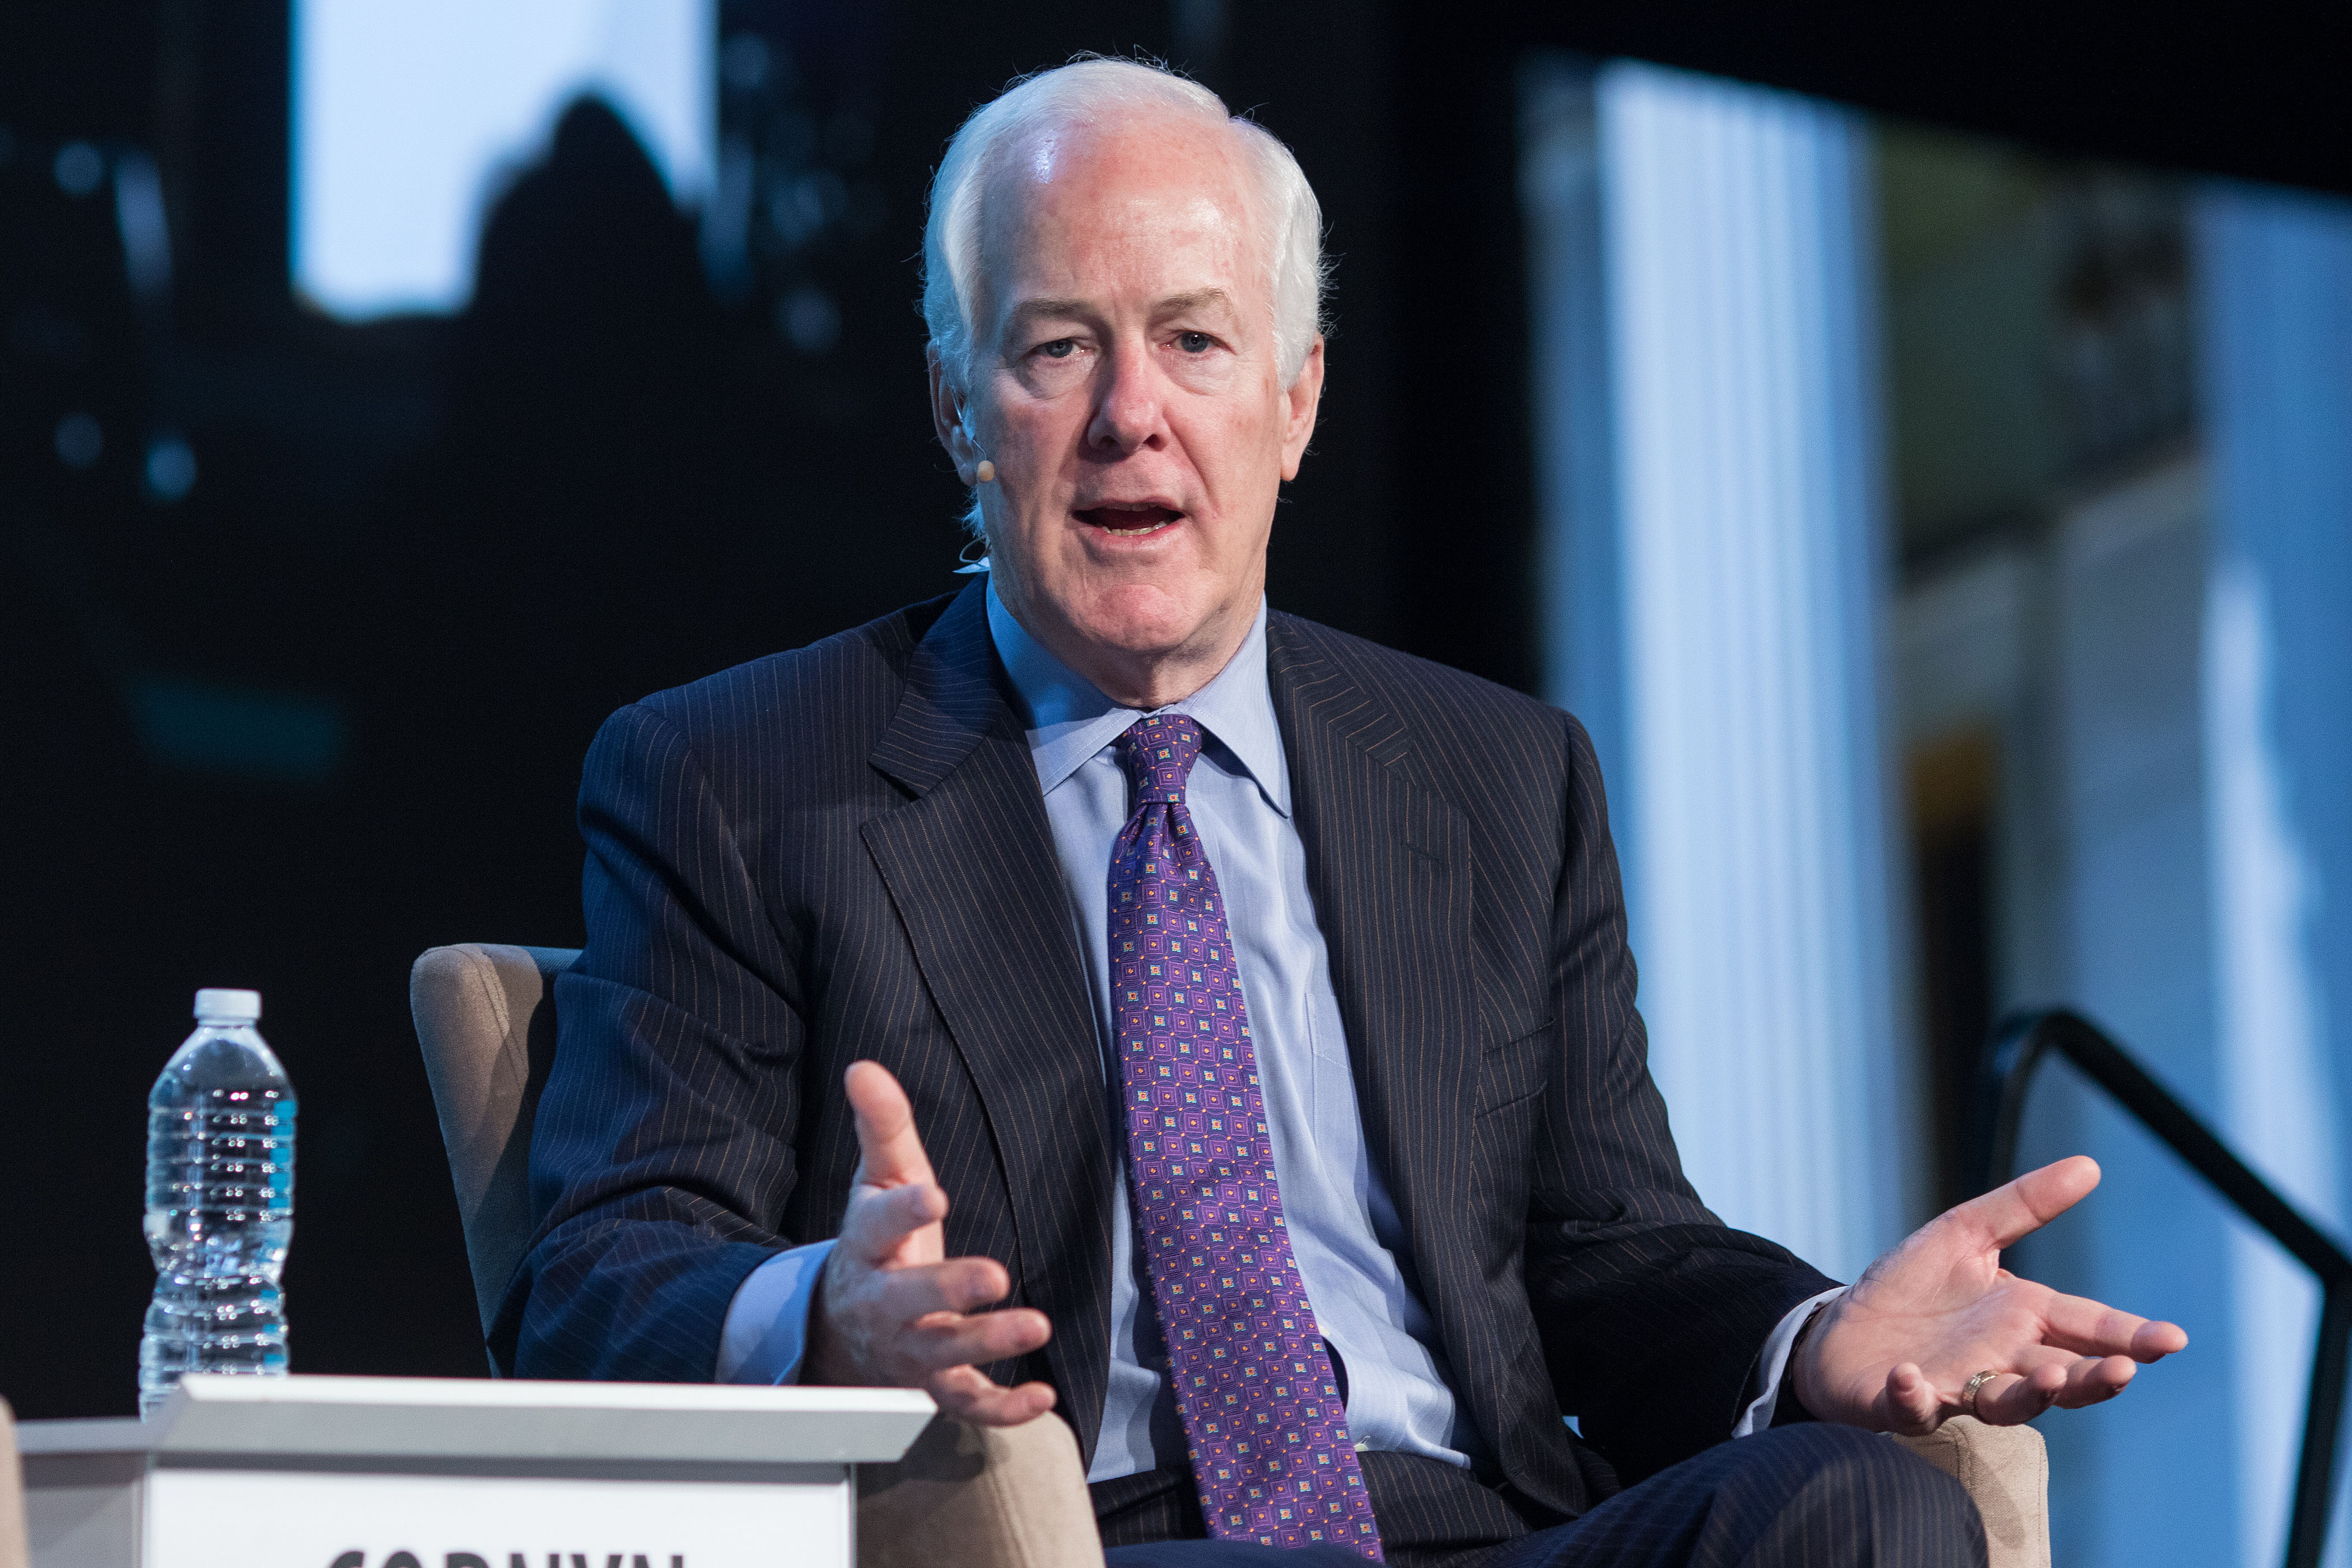 Sen. John Cornyn, a Republican from Texas, speaks during the 2017 CERAWeek by IHS Markit conference in Houston, Texas on March 10, 2017. (F. Carter Smith—Bloomberg/Getty Images)